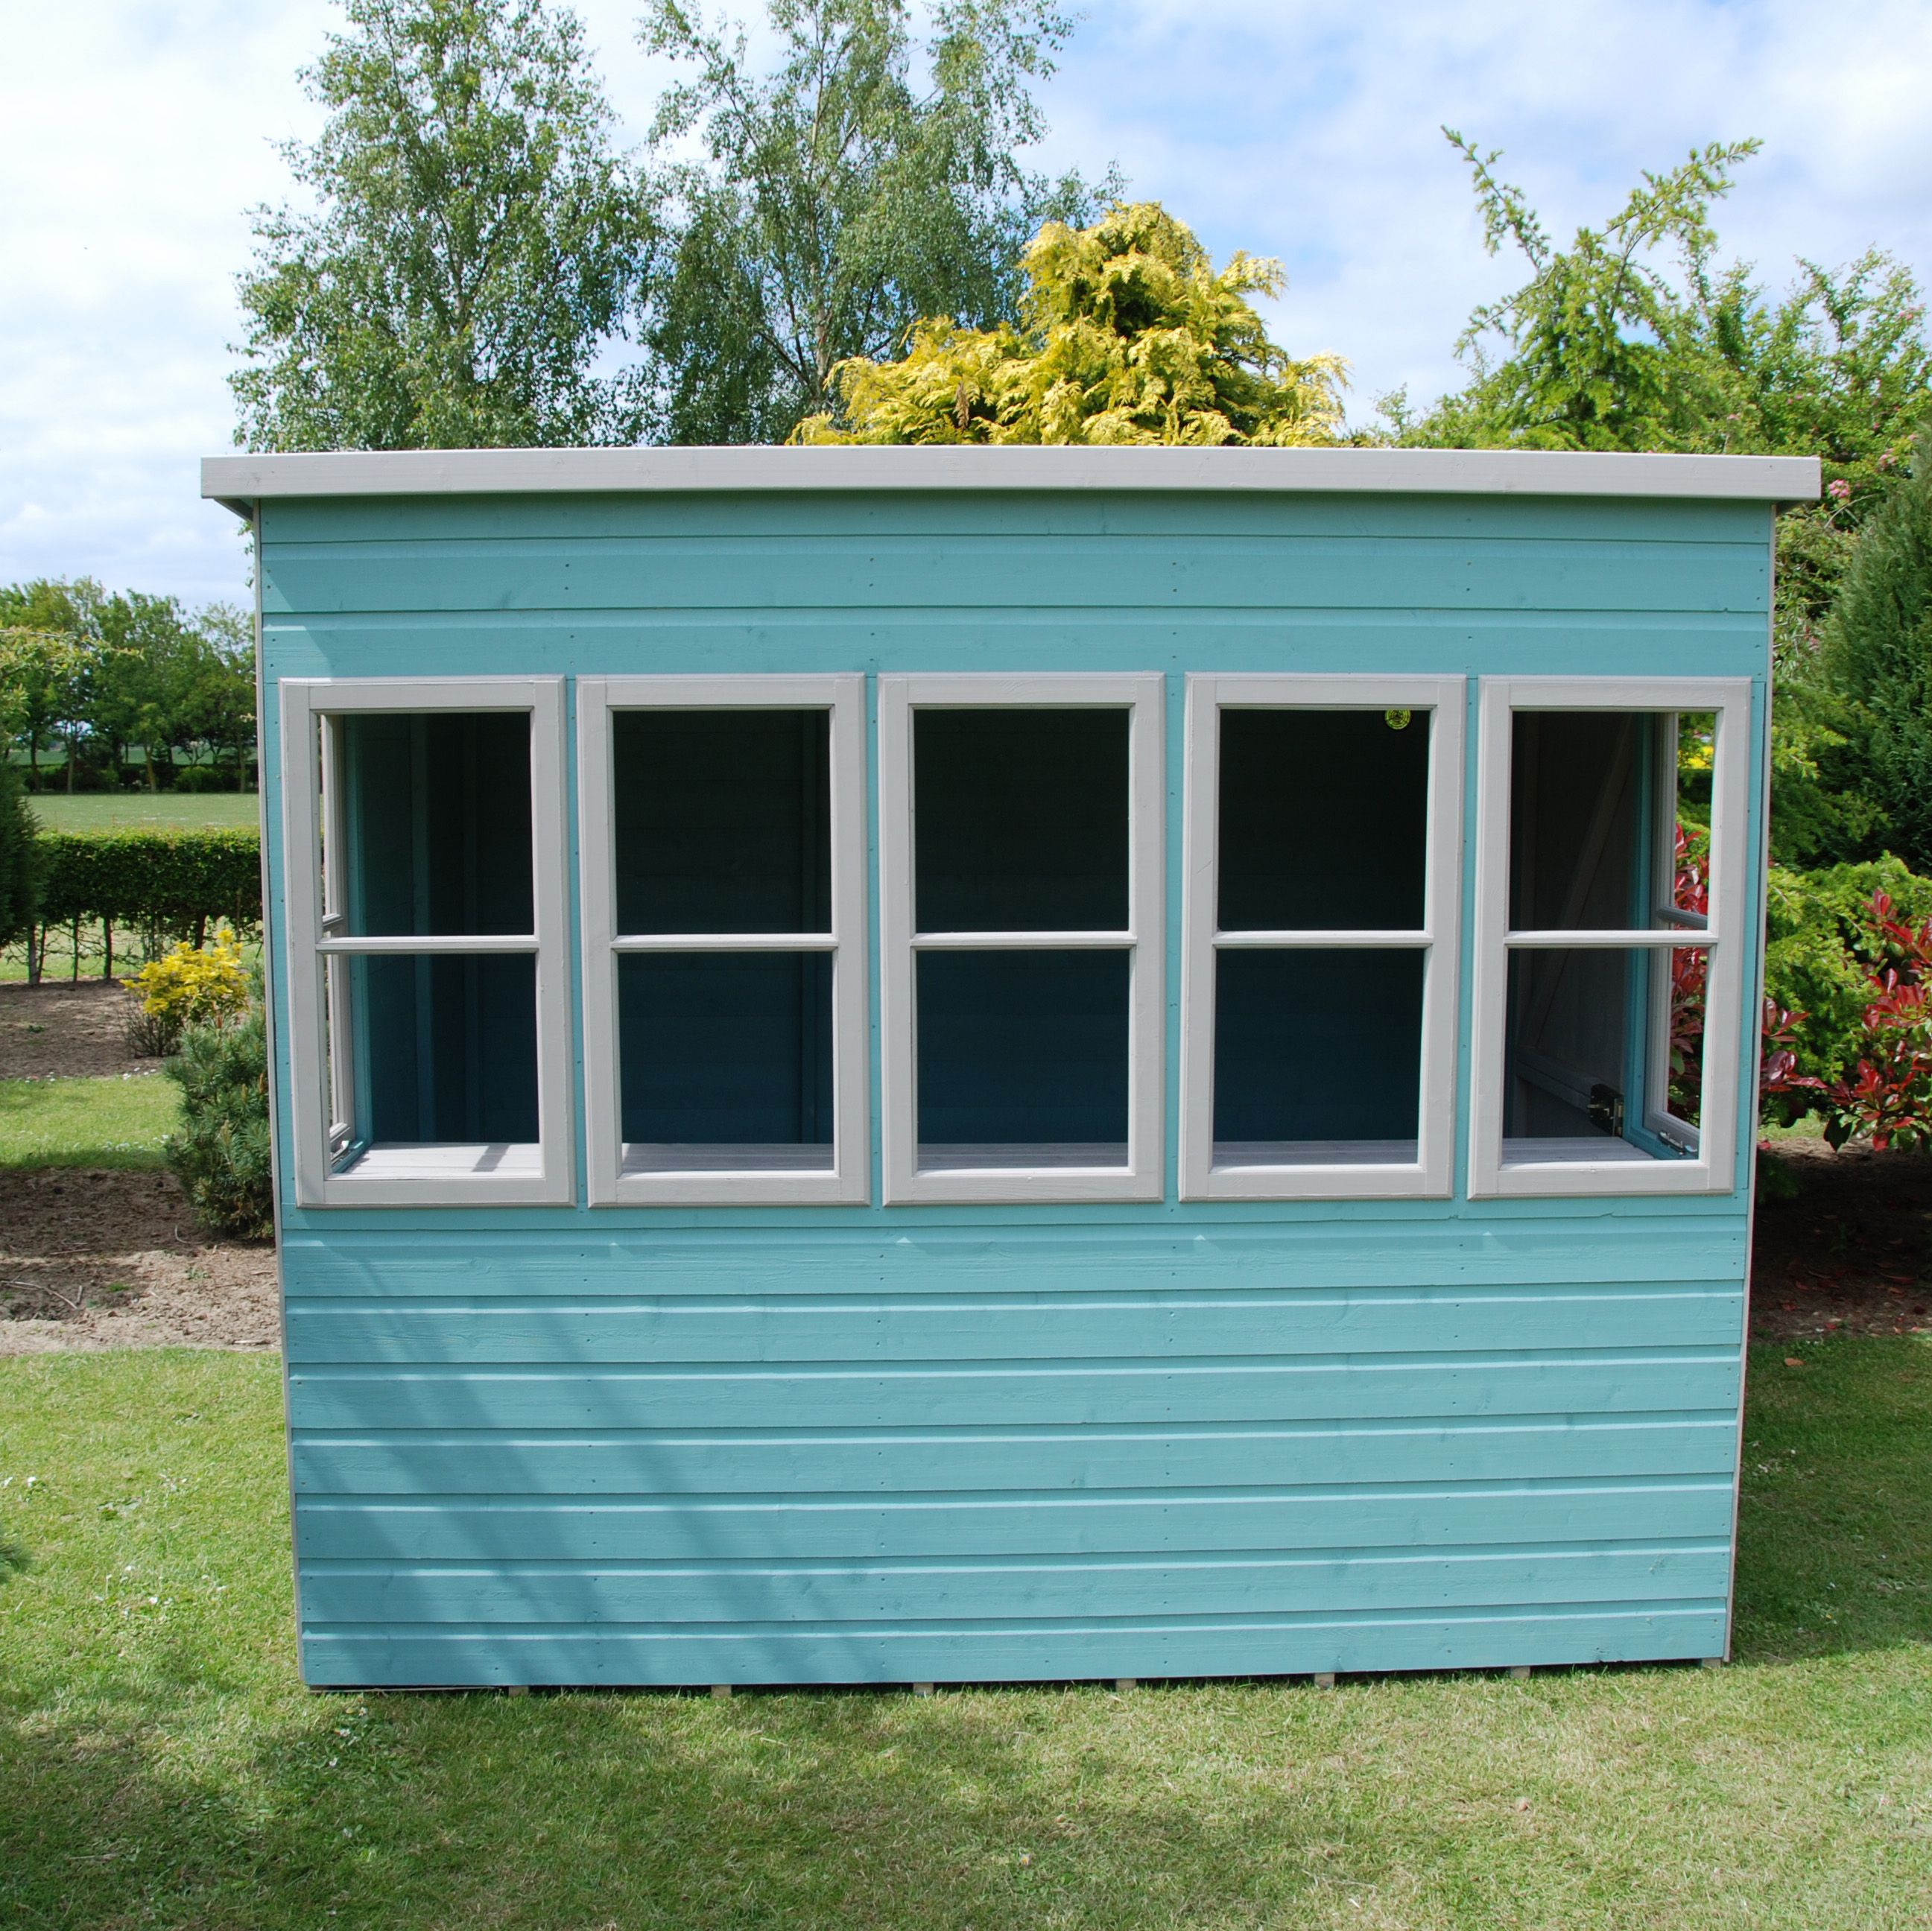 Shire Sun 8x8 ft & 5 windows Pent Wooden Summer house - Assembly service included